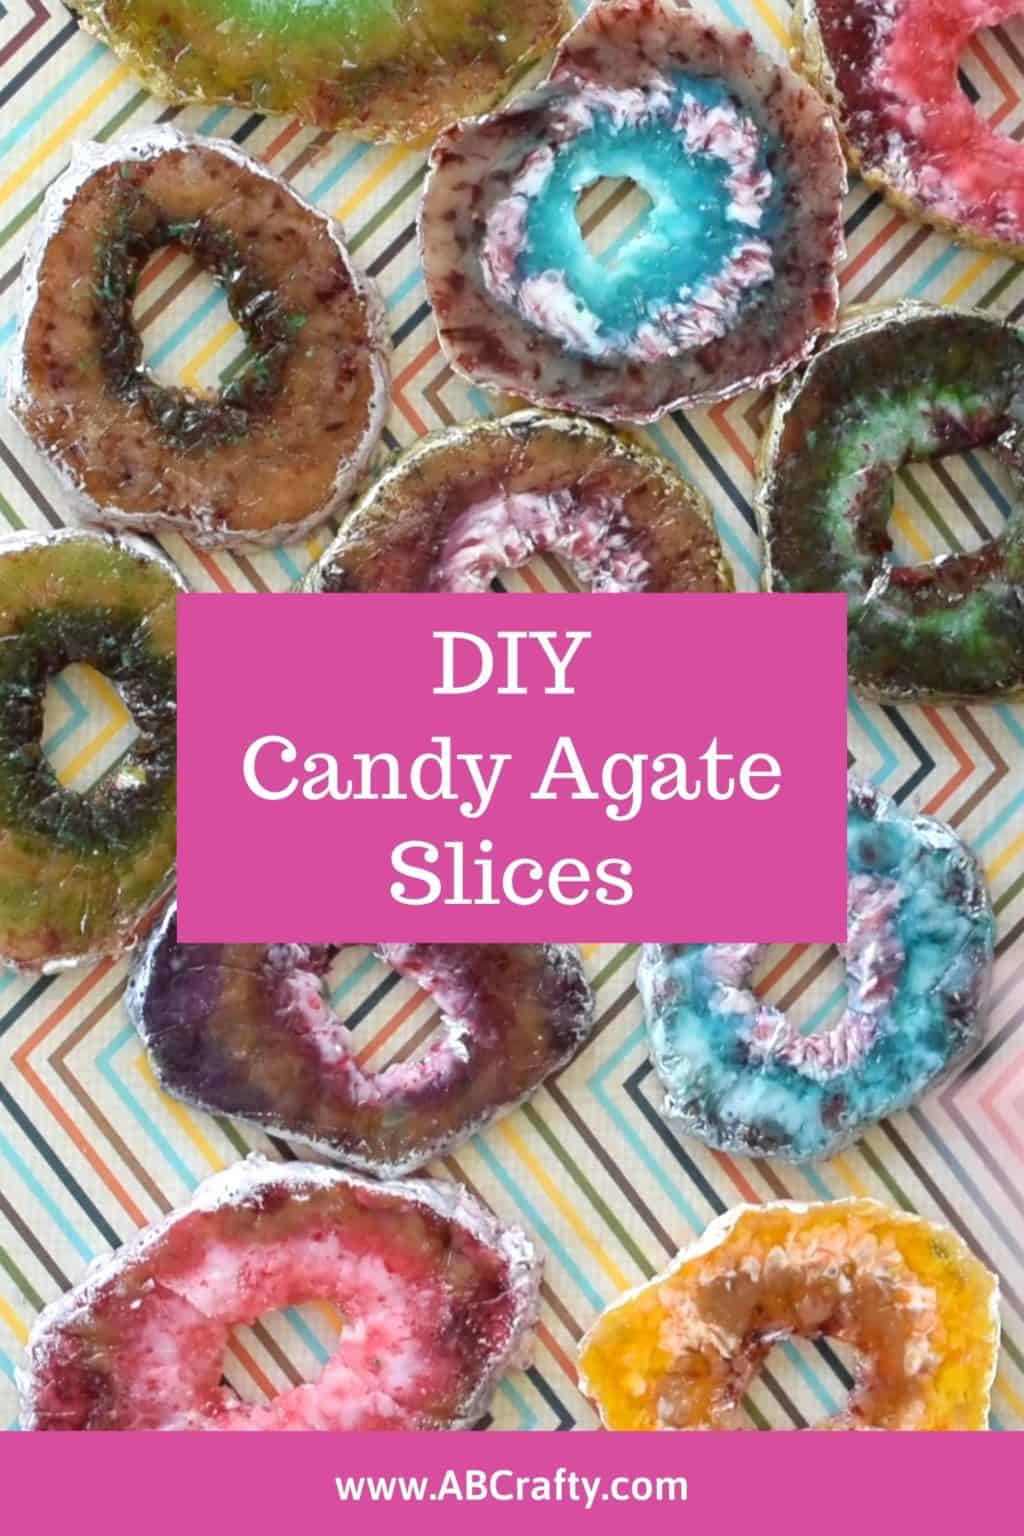 multi colored agate candy on a table with the title "diy candy agate slices"